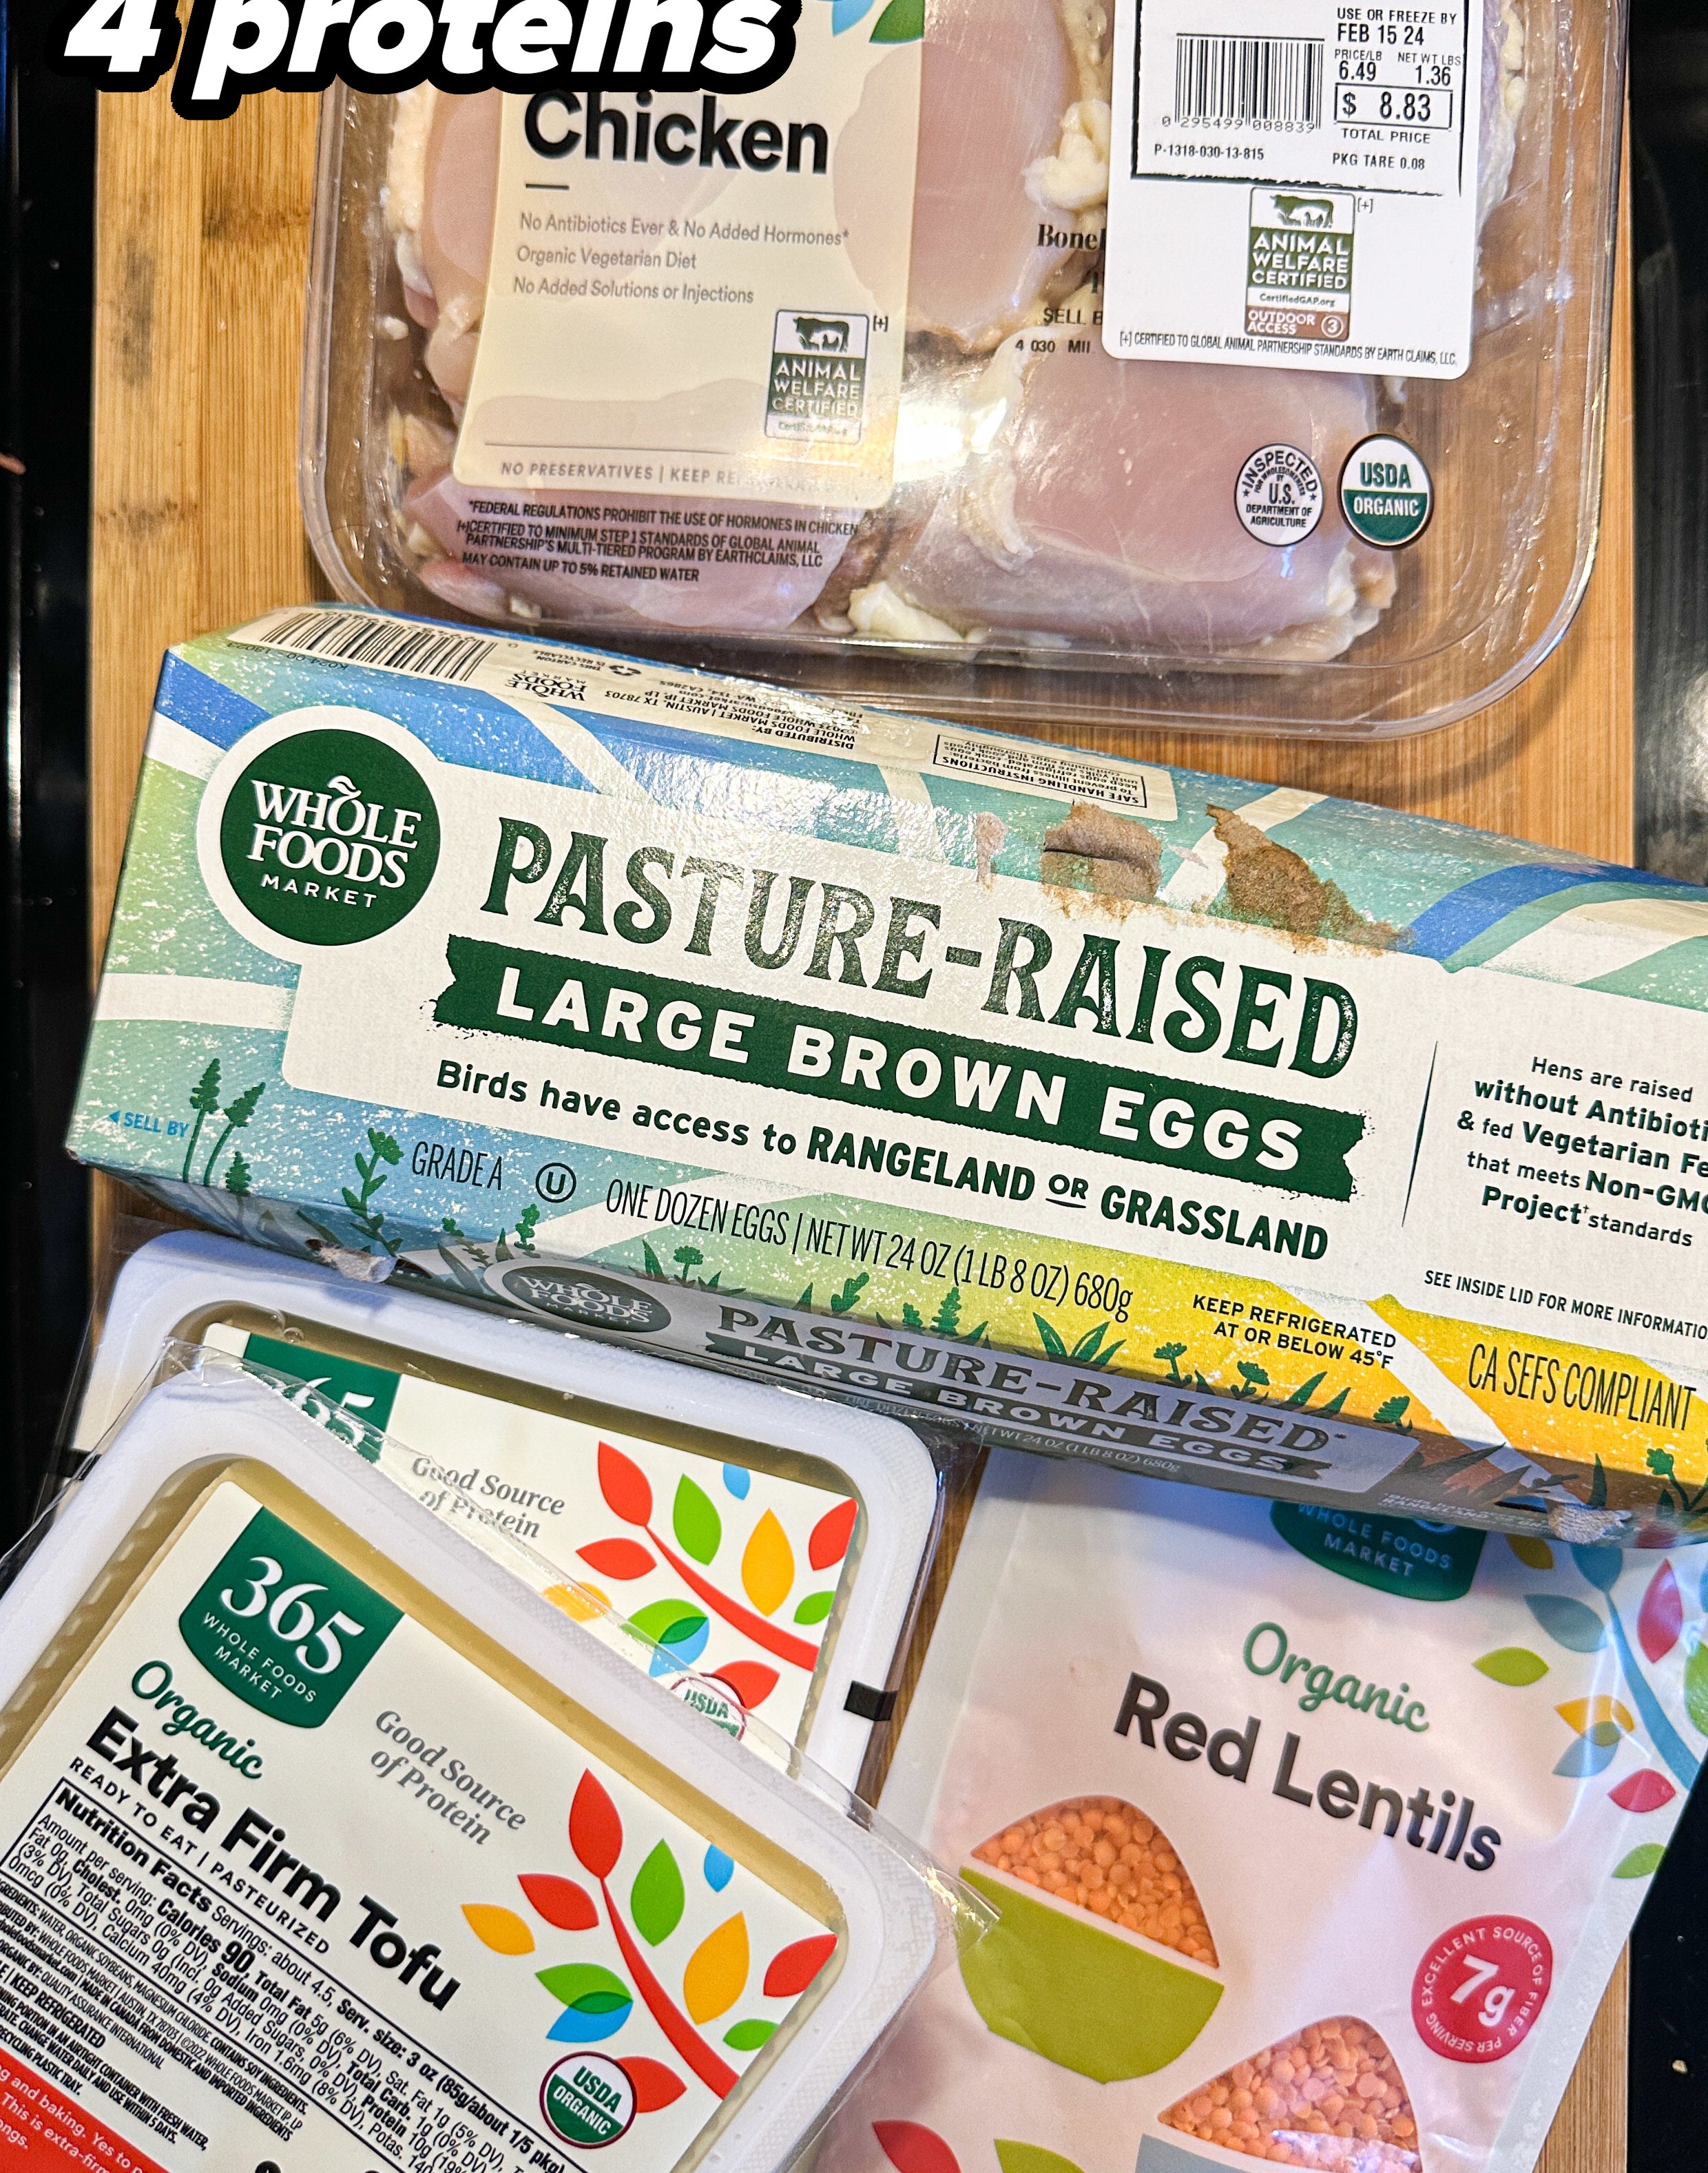 Various grocery items including organic chicken, pasture-raised eggs, extra firm tofu, and red lentils